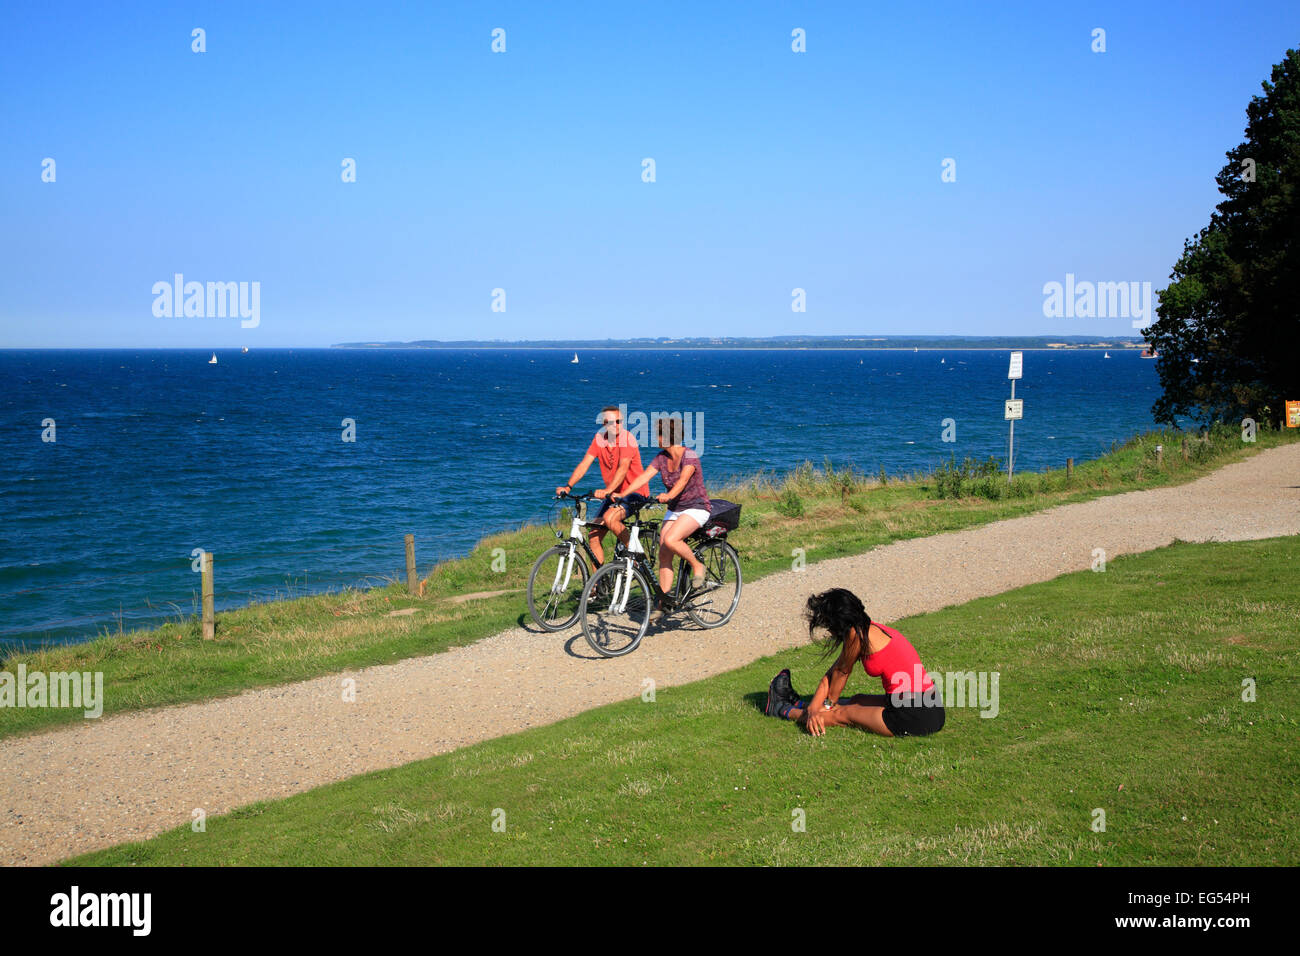 Bicyclists at  Brodten cliff near Travemuende, Baltic Sea coast, Schleswig-Holstein, Germany, Europe Stock Photo